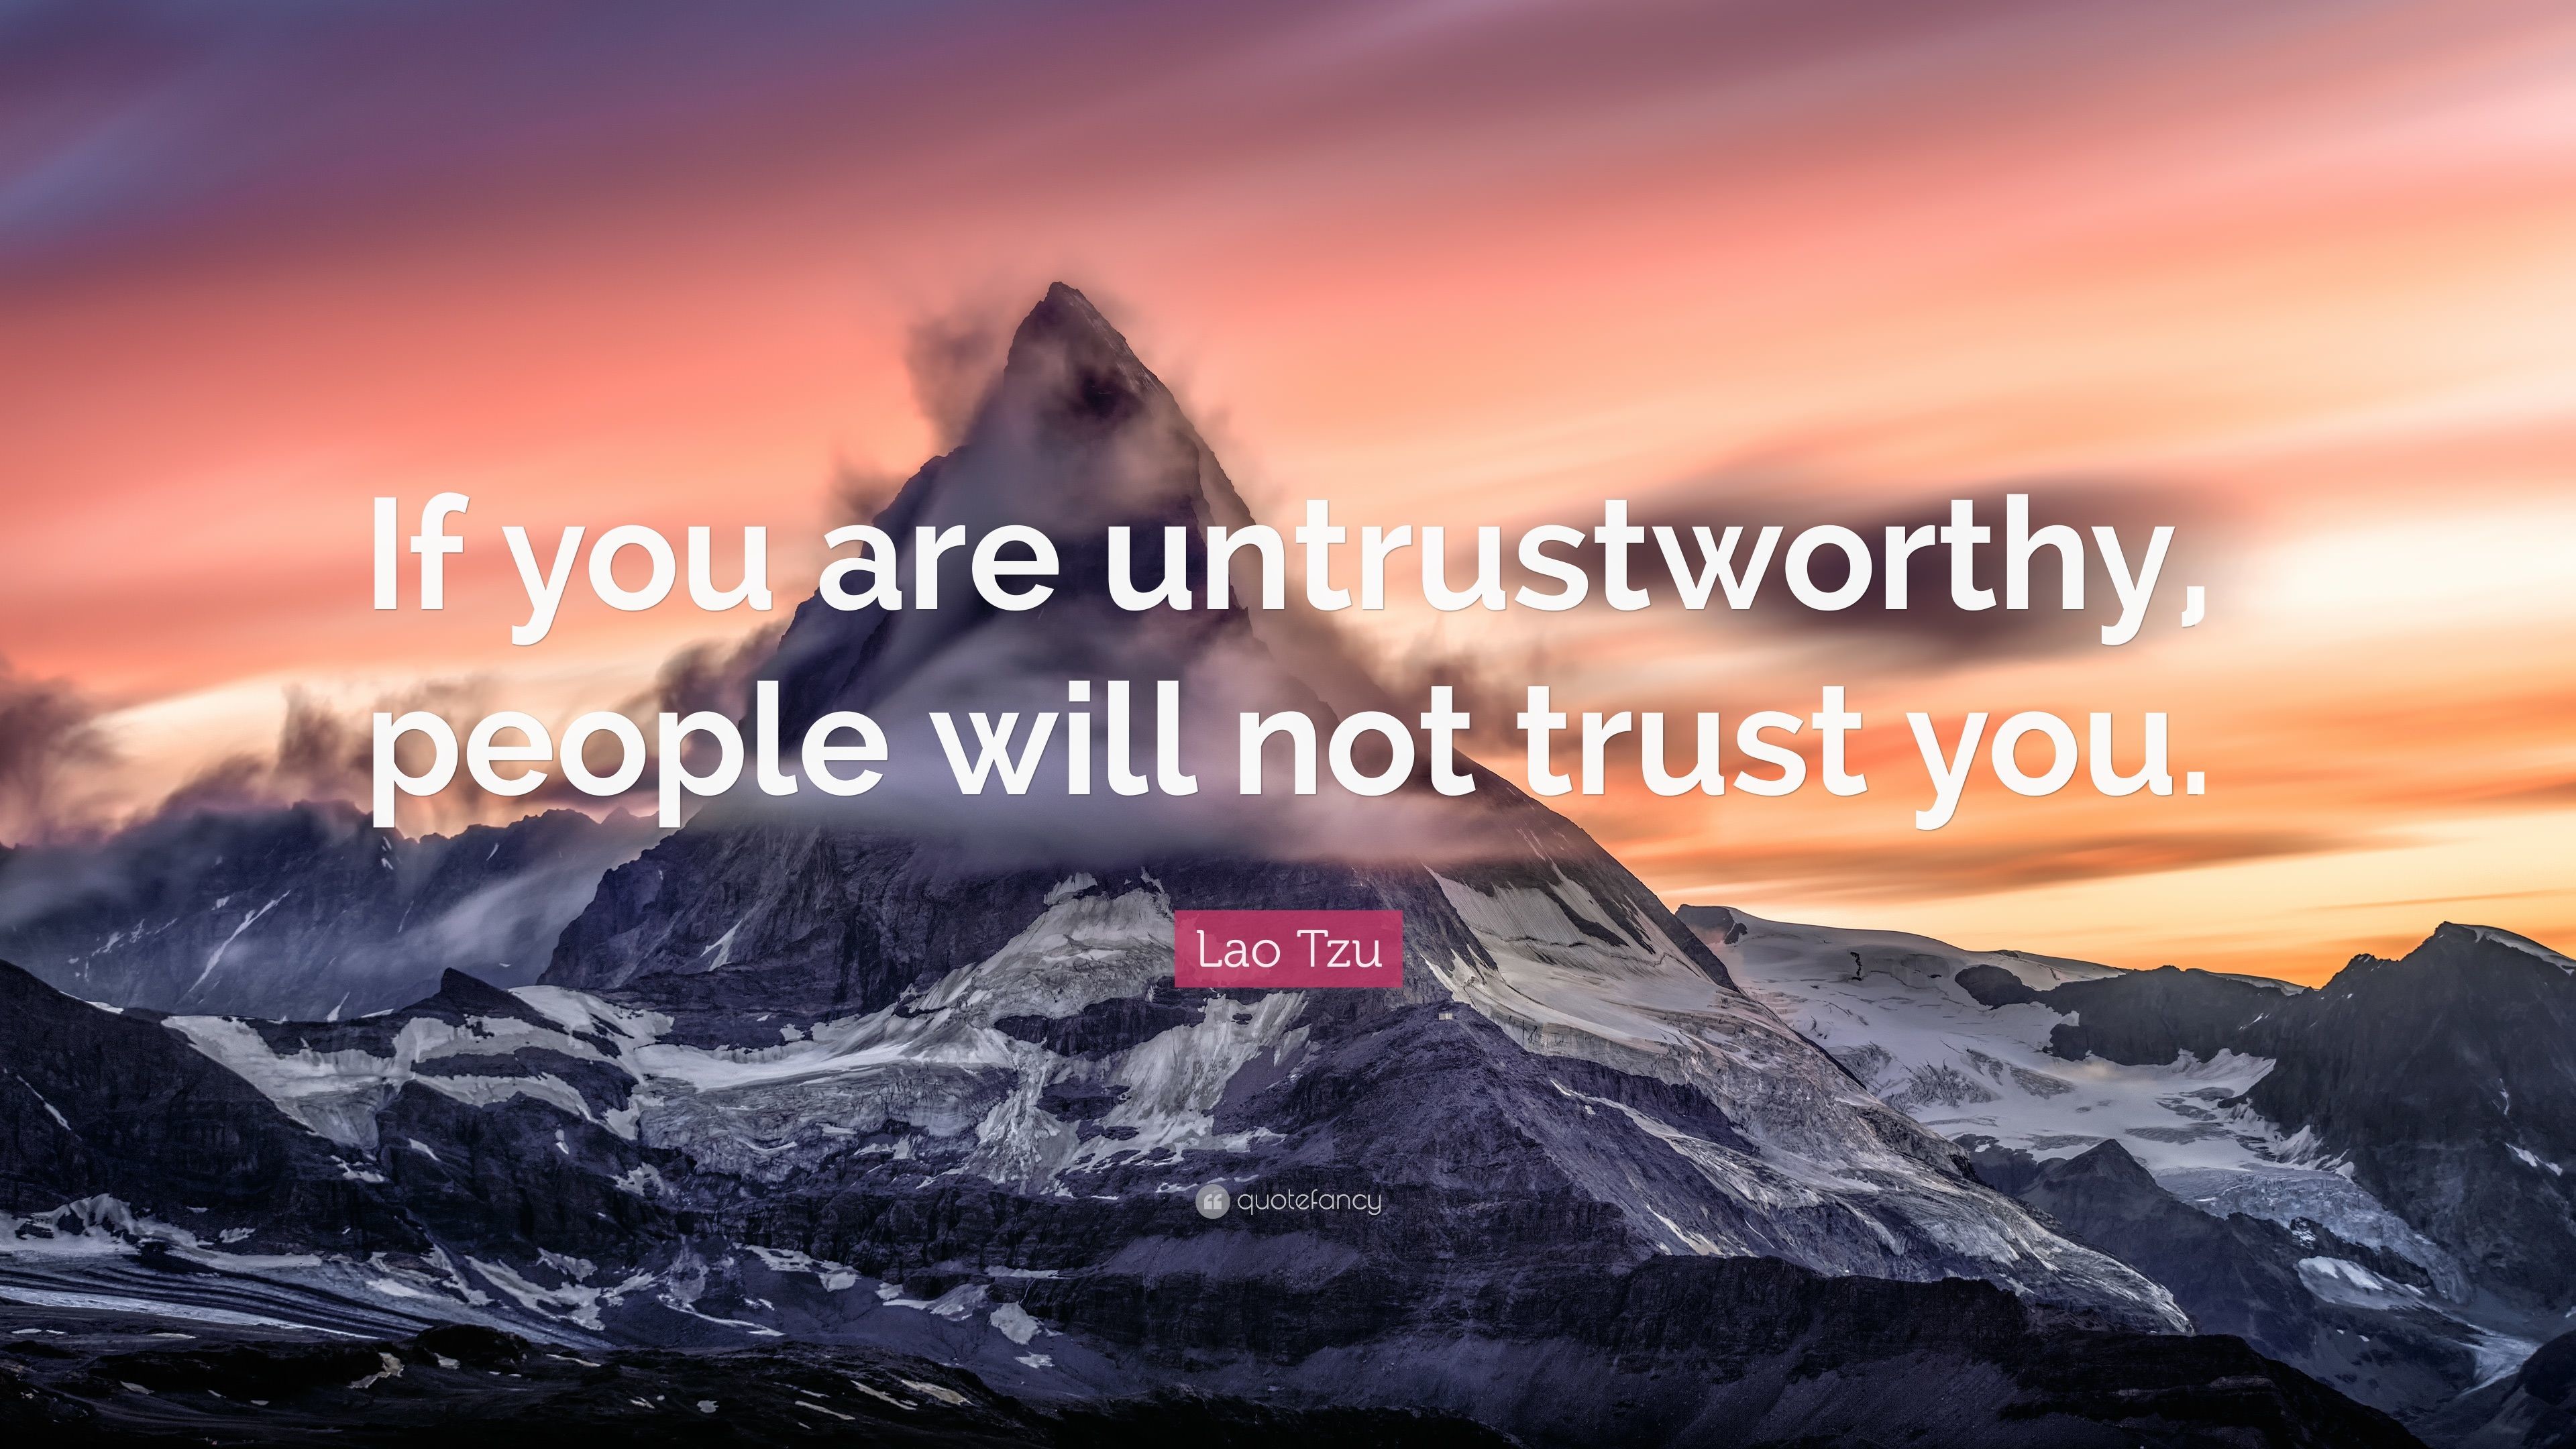 3840x2160 Lao Tzu Quote: “If you are untrustworthy, people will not trust you.